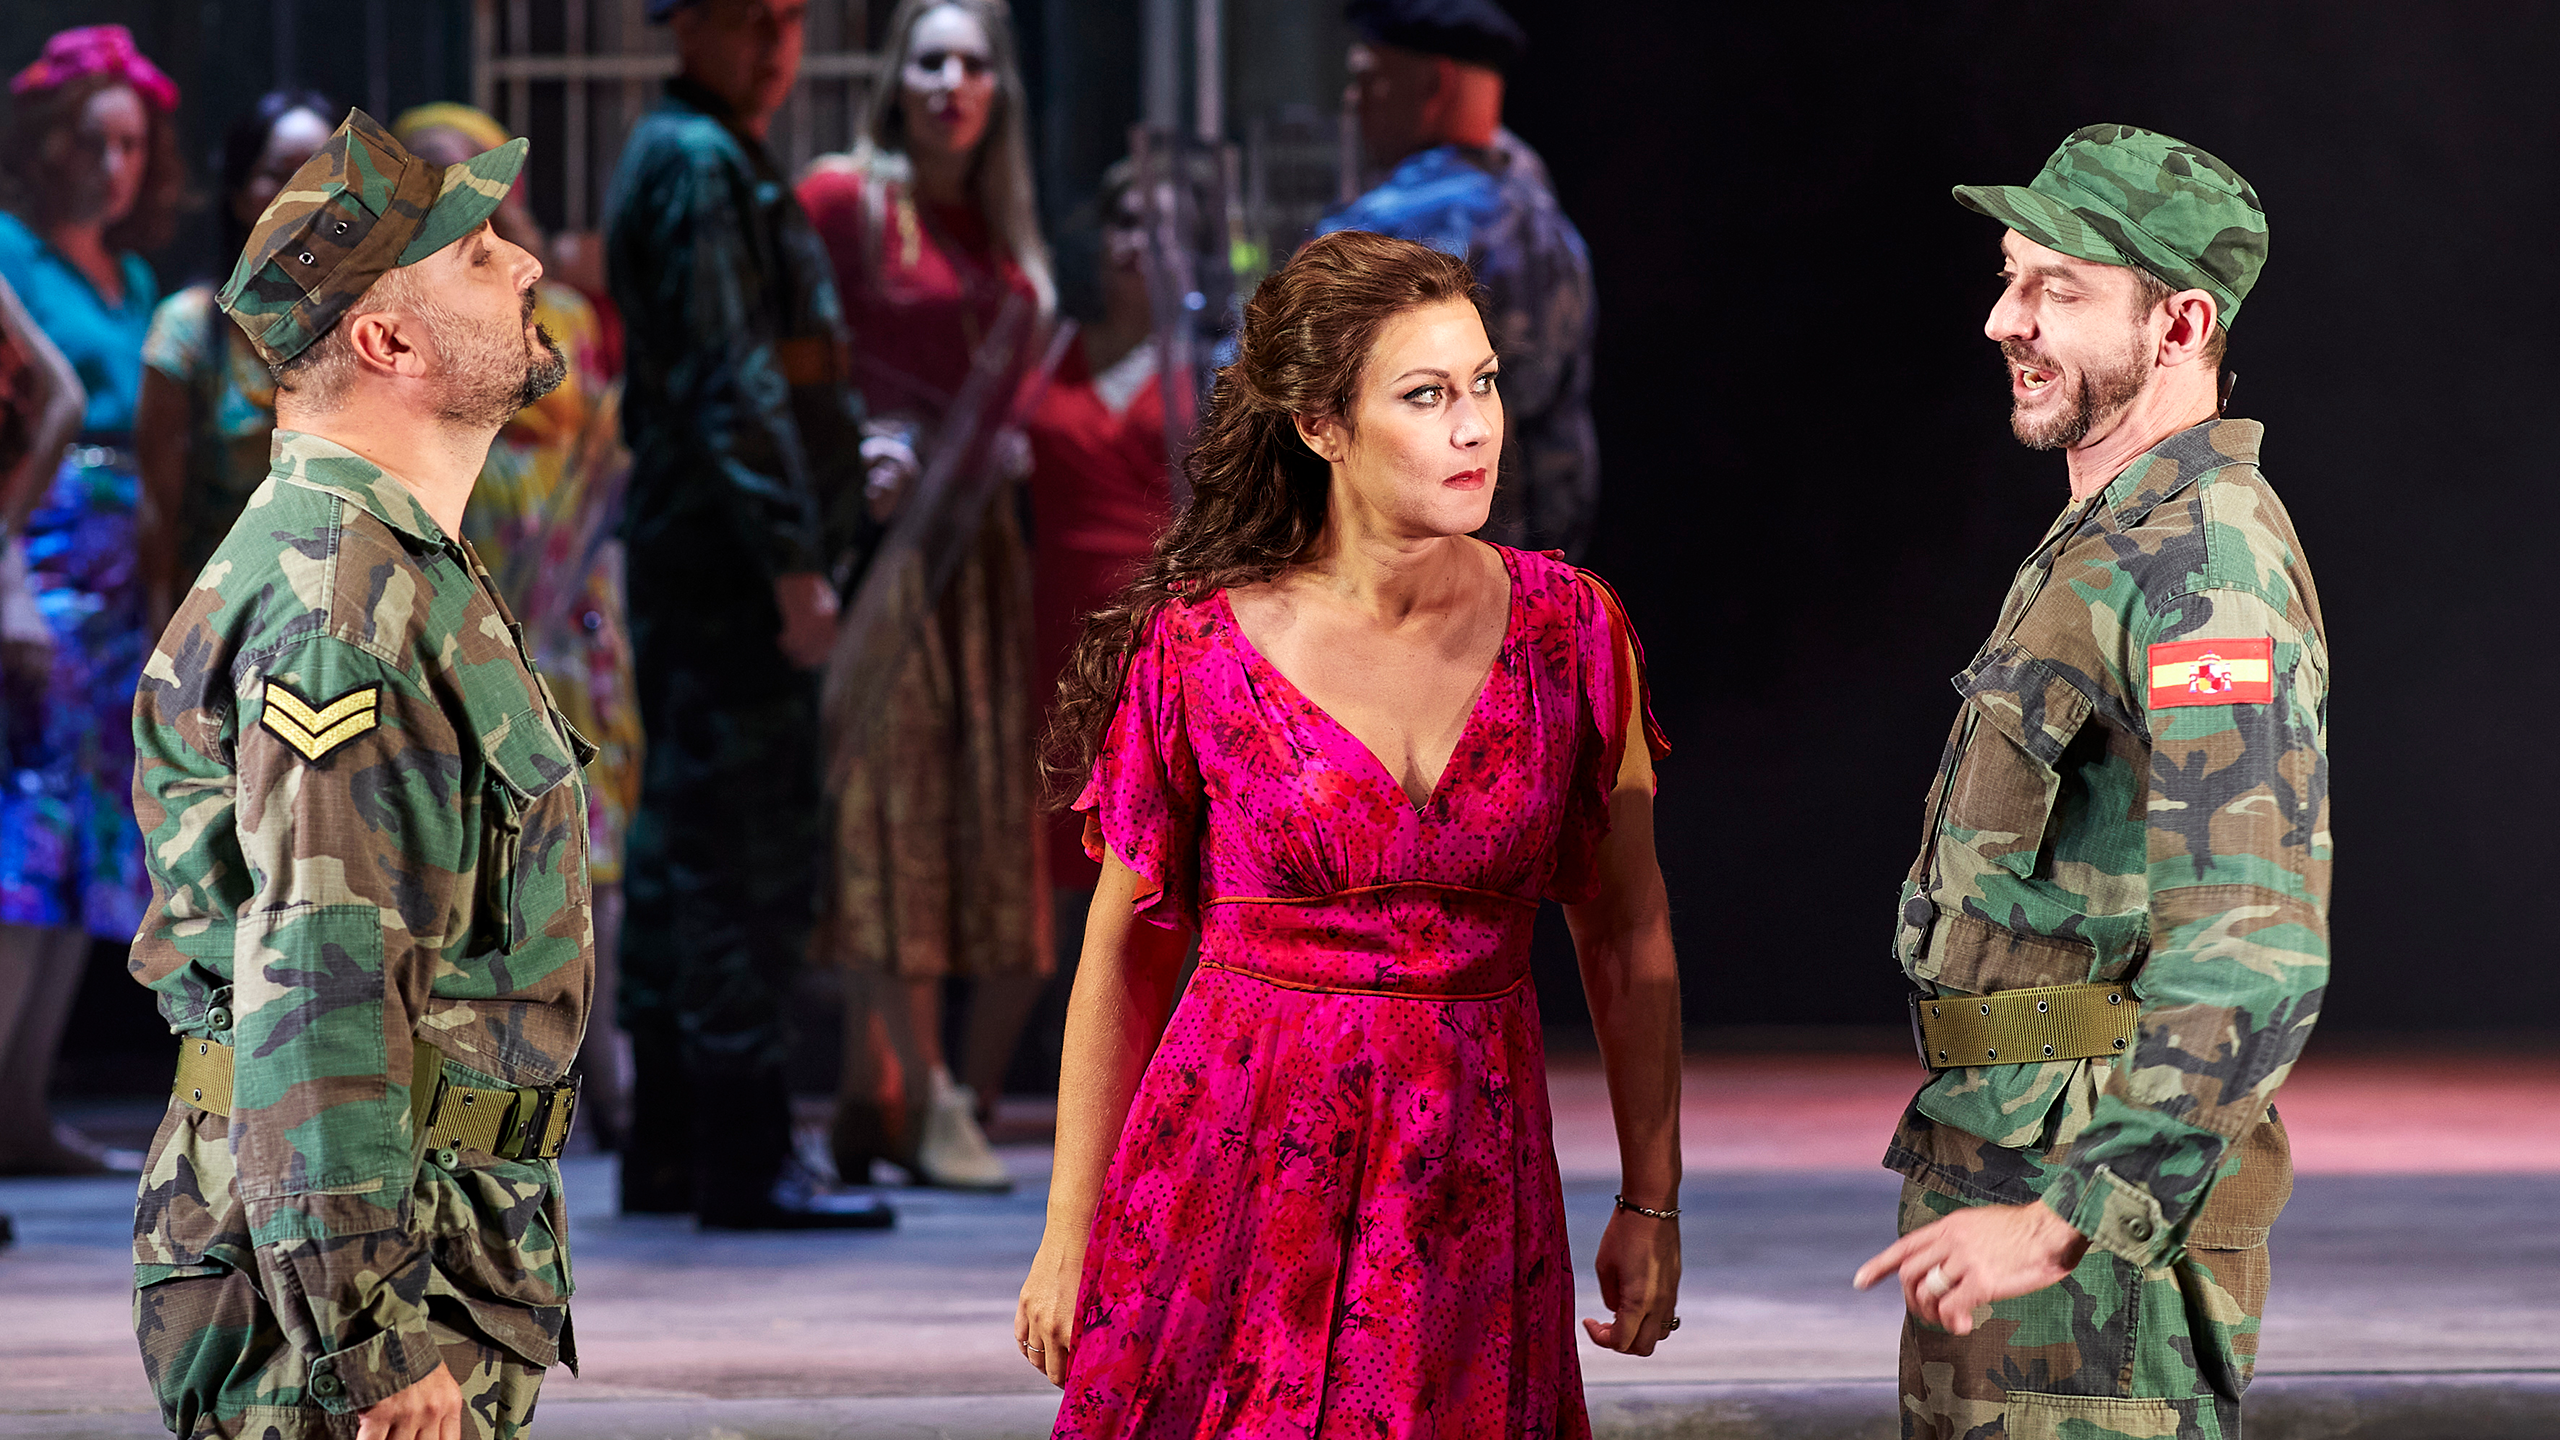 Singer Veronica Simeoni on stage in a red dress as Carmen in the opera Carmen.